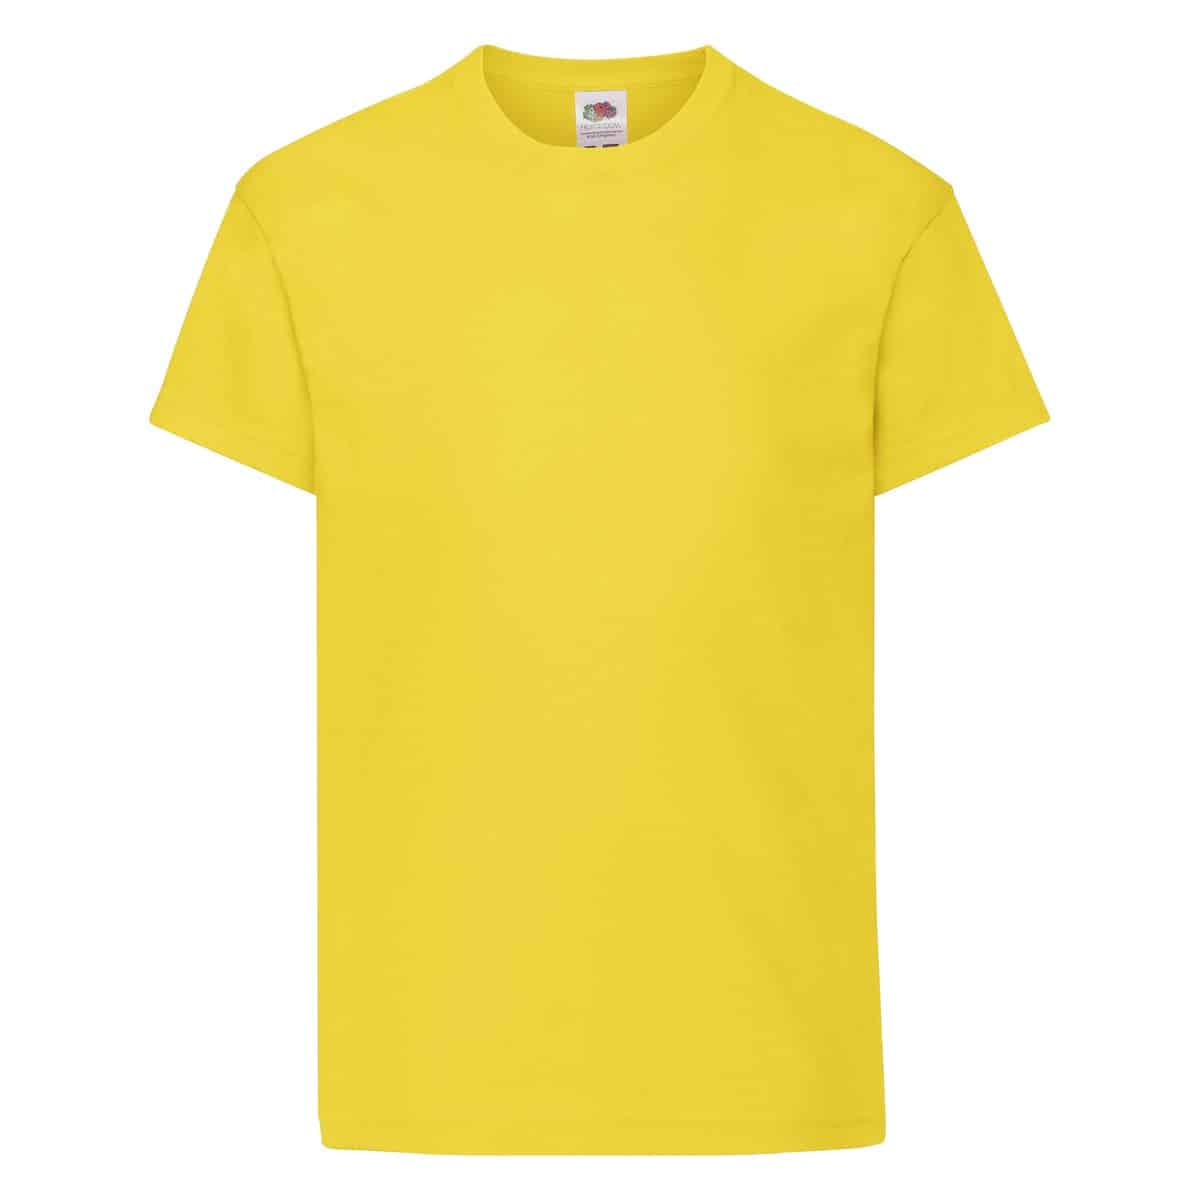 Sunflower 12-13 Anni Giallo Fruit of the Loom T-Shirt Bambino Manufacturer Size:34